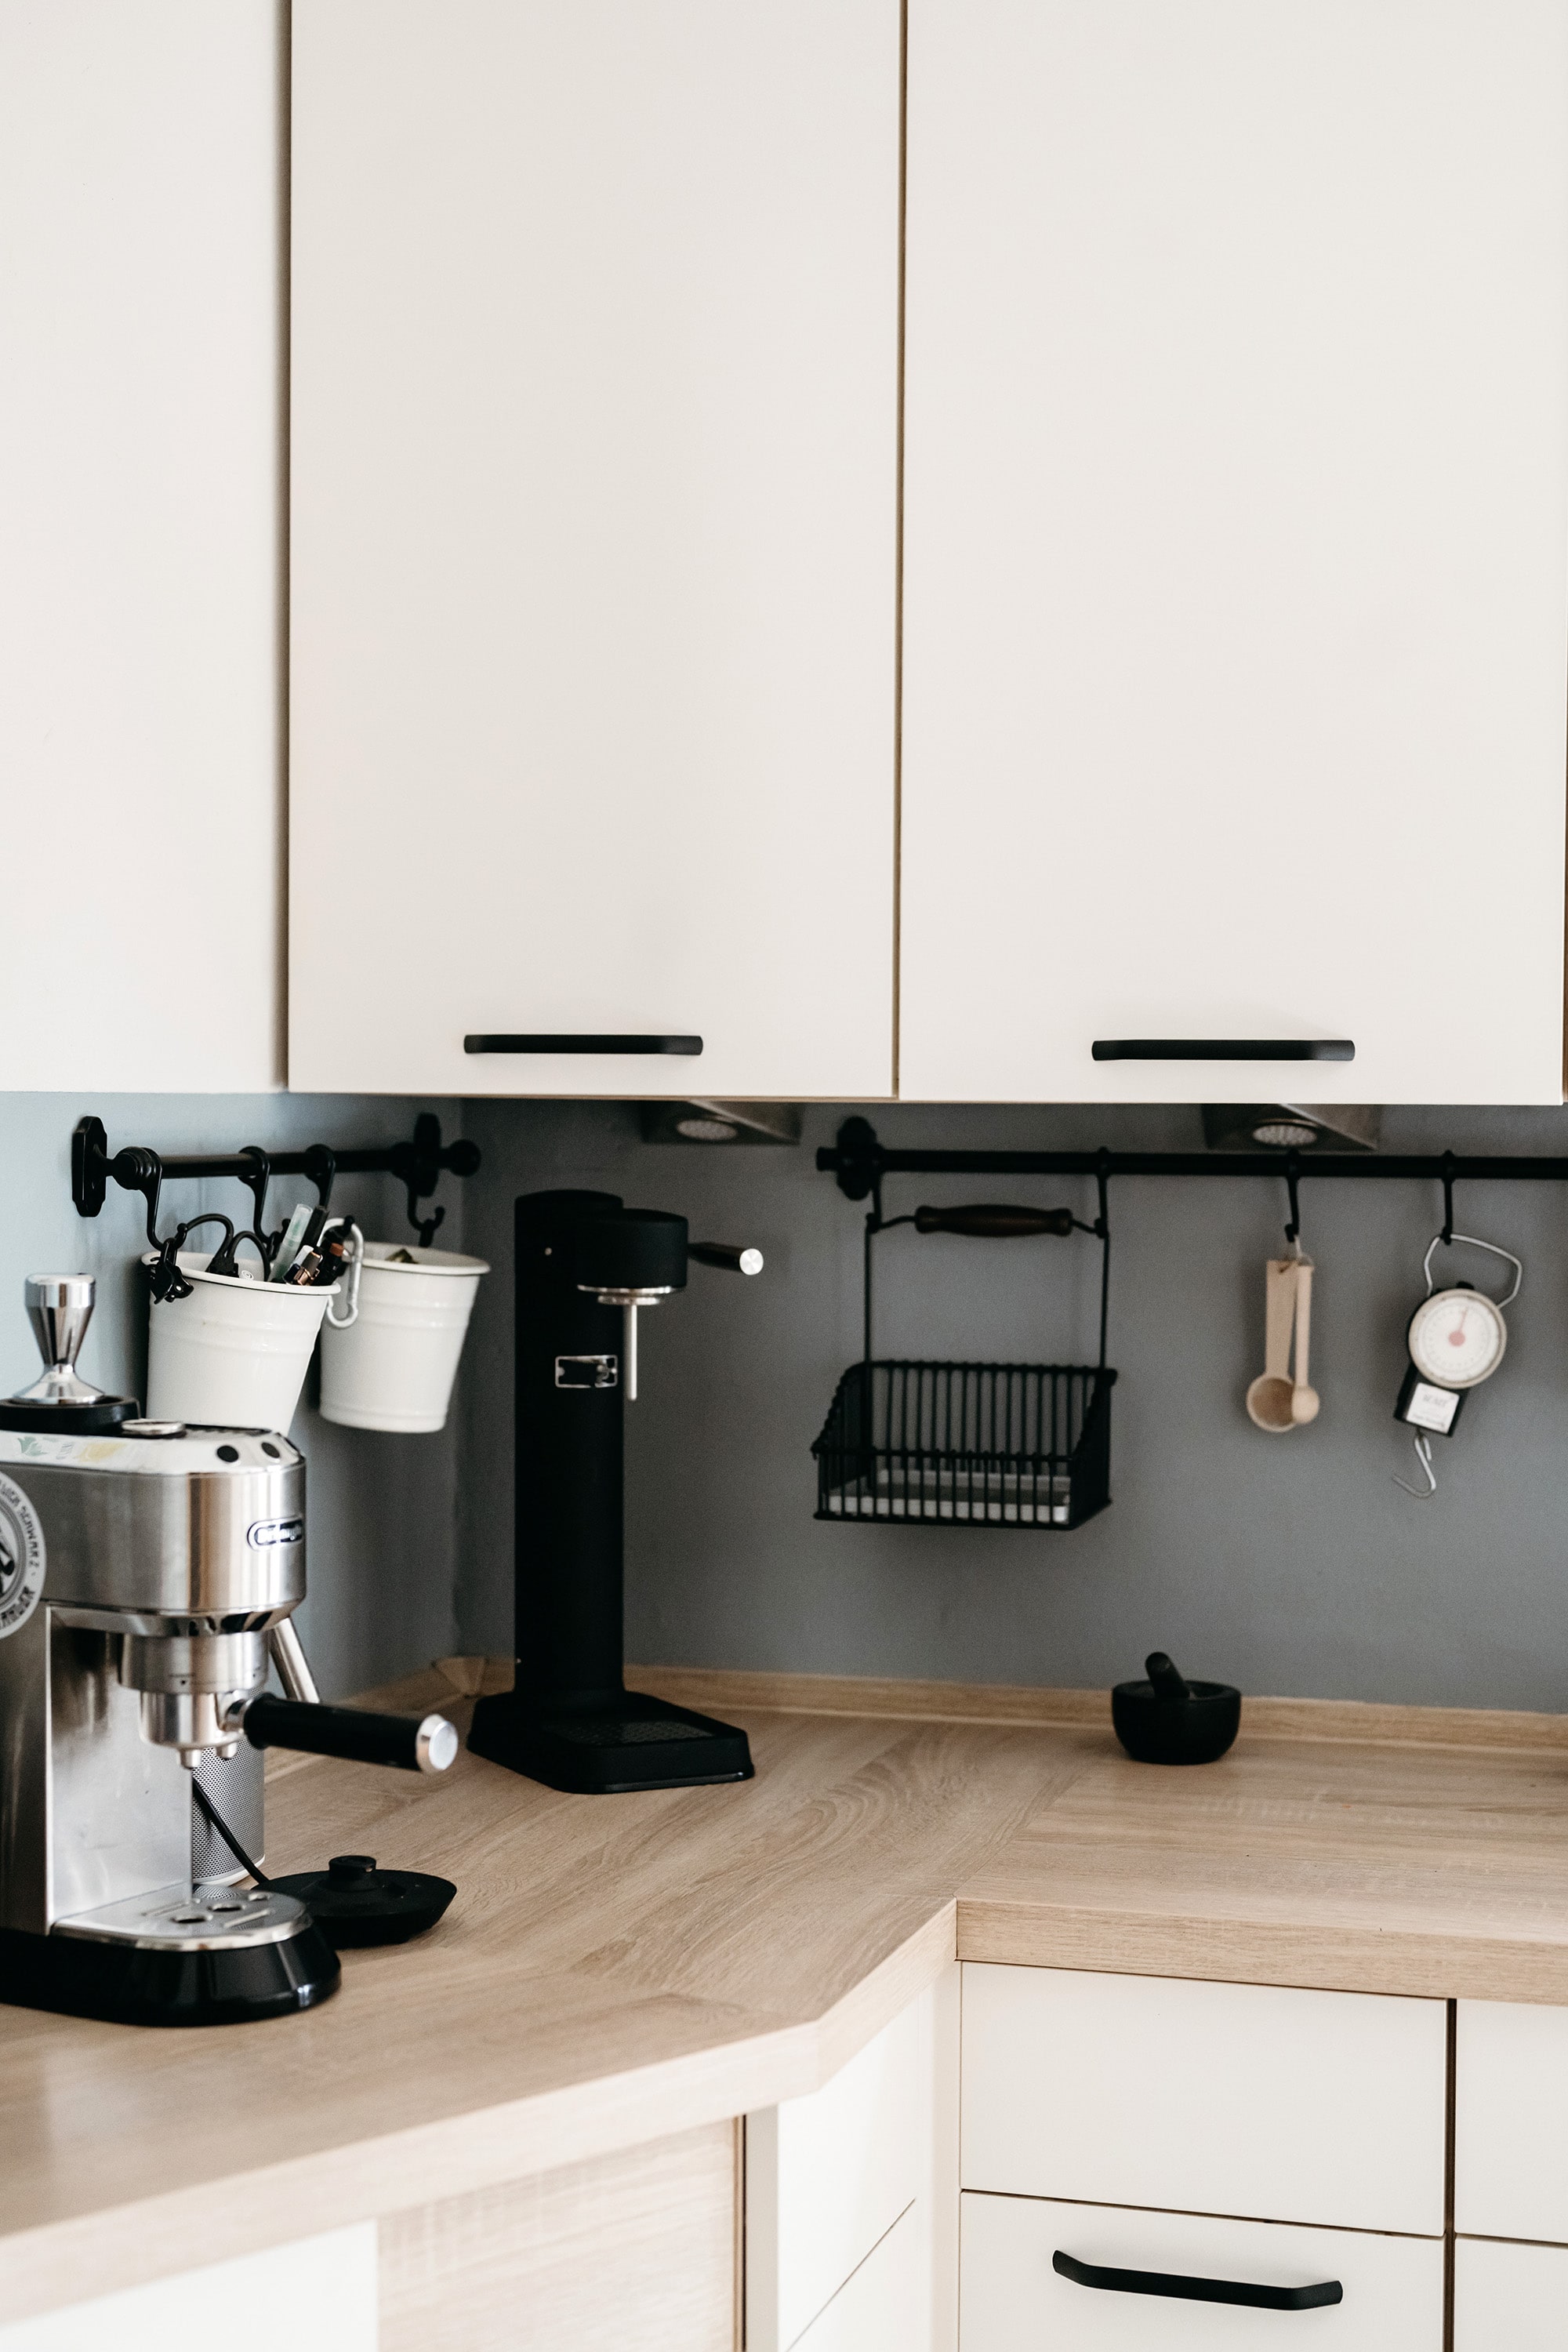 Example of a home coffee bar